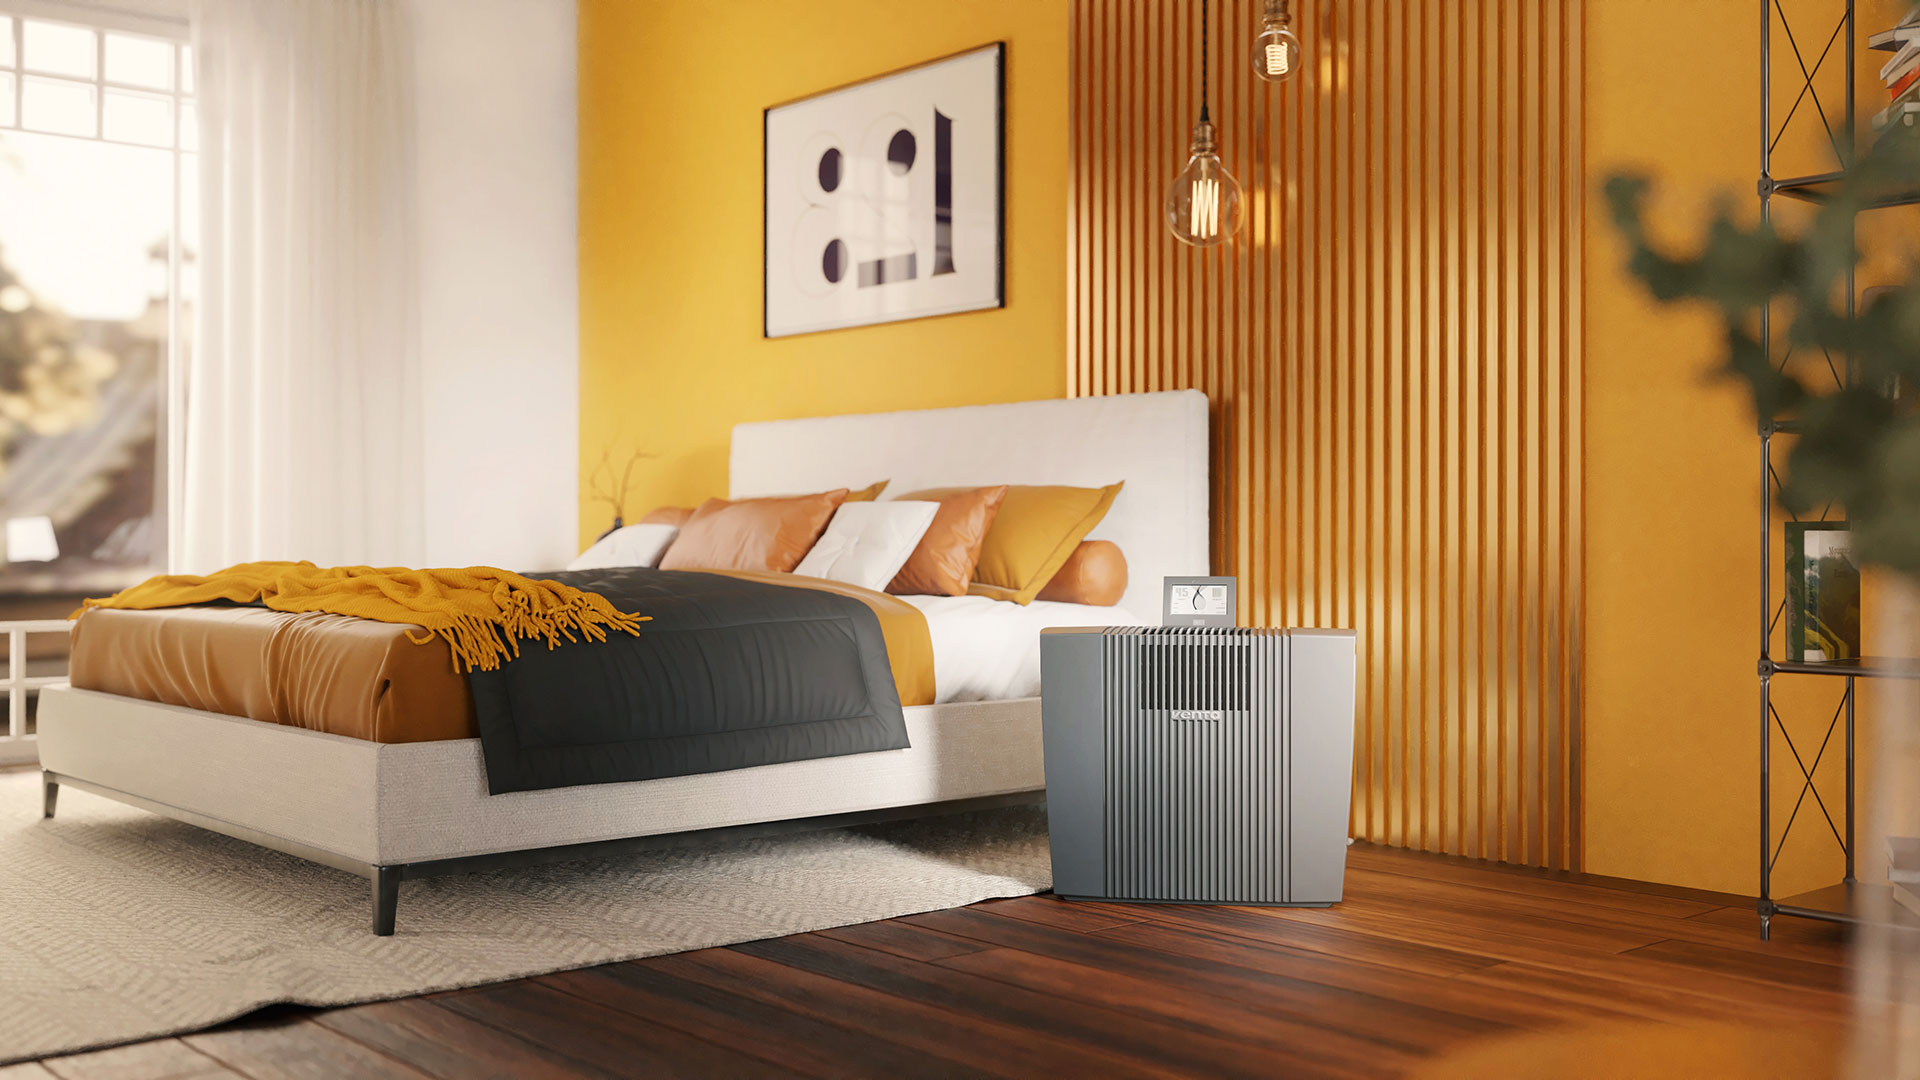 Venta Air Purifier Professional against allergies stands in a bedroom in yellow and orange tones.